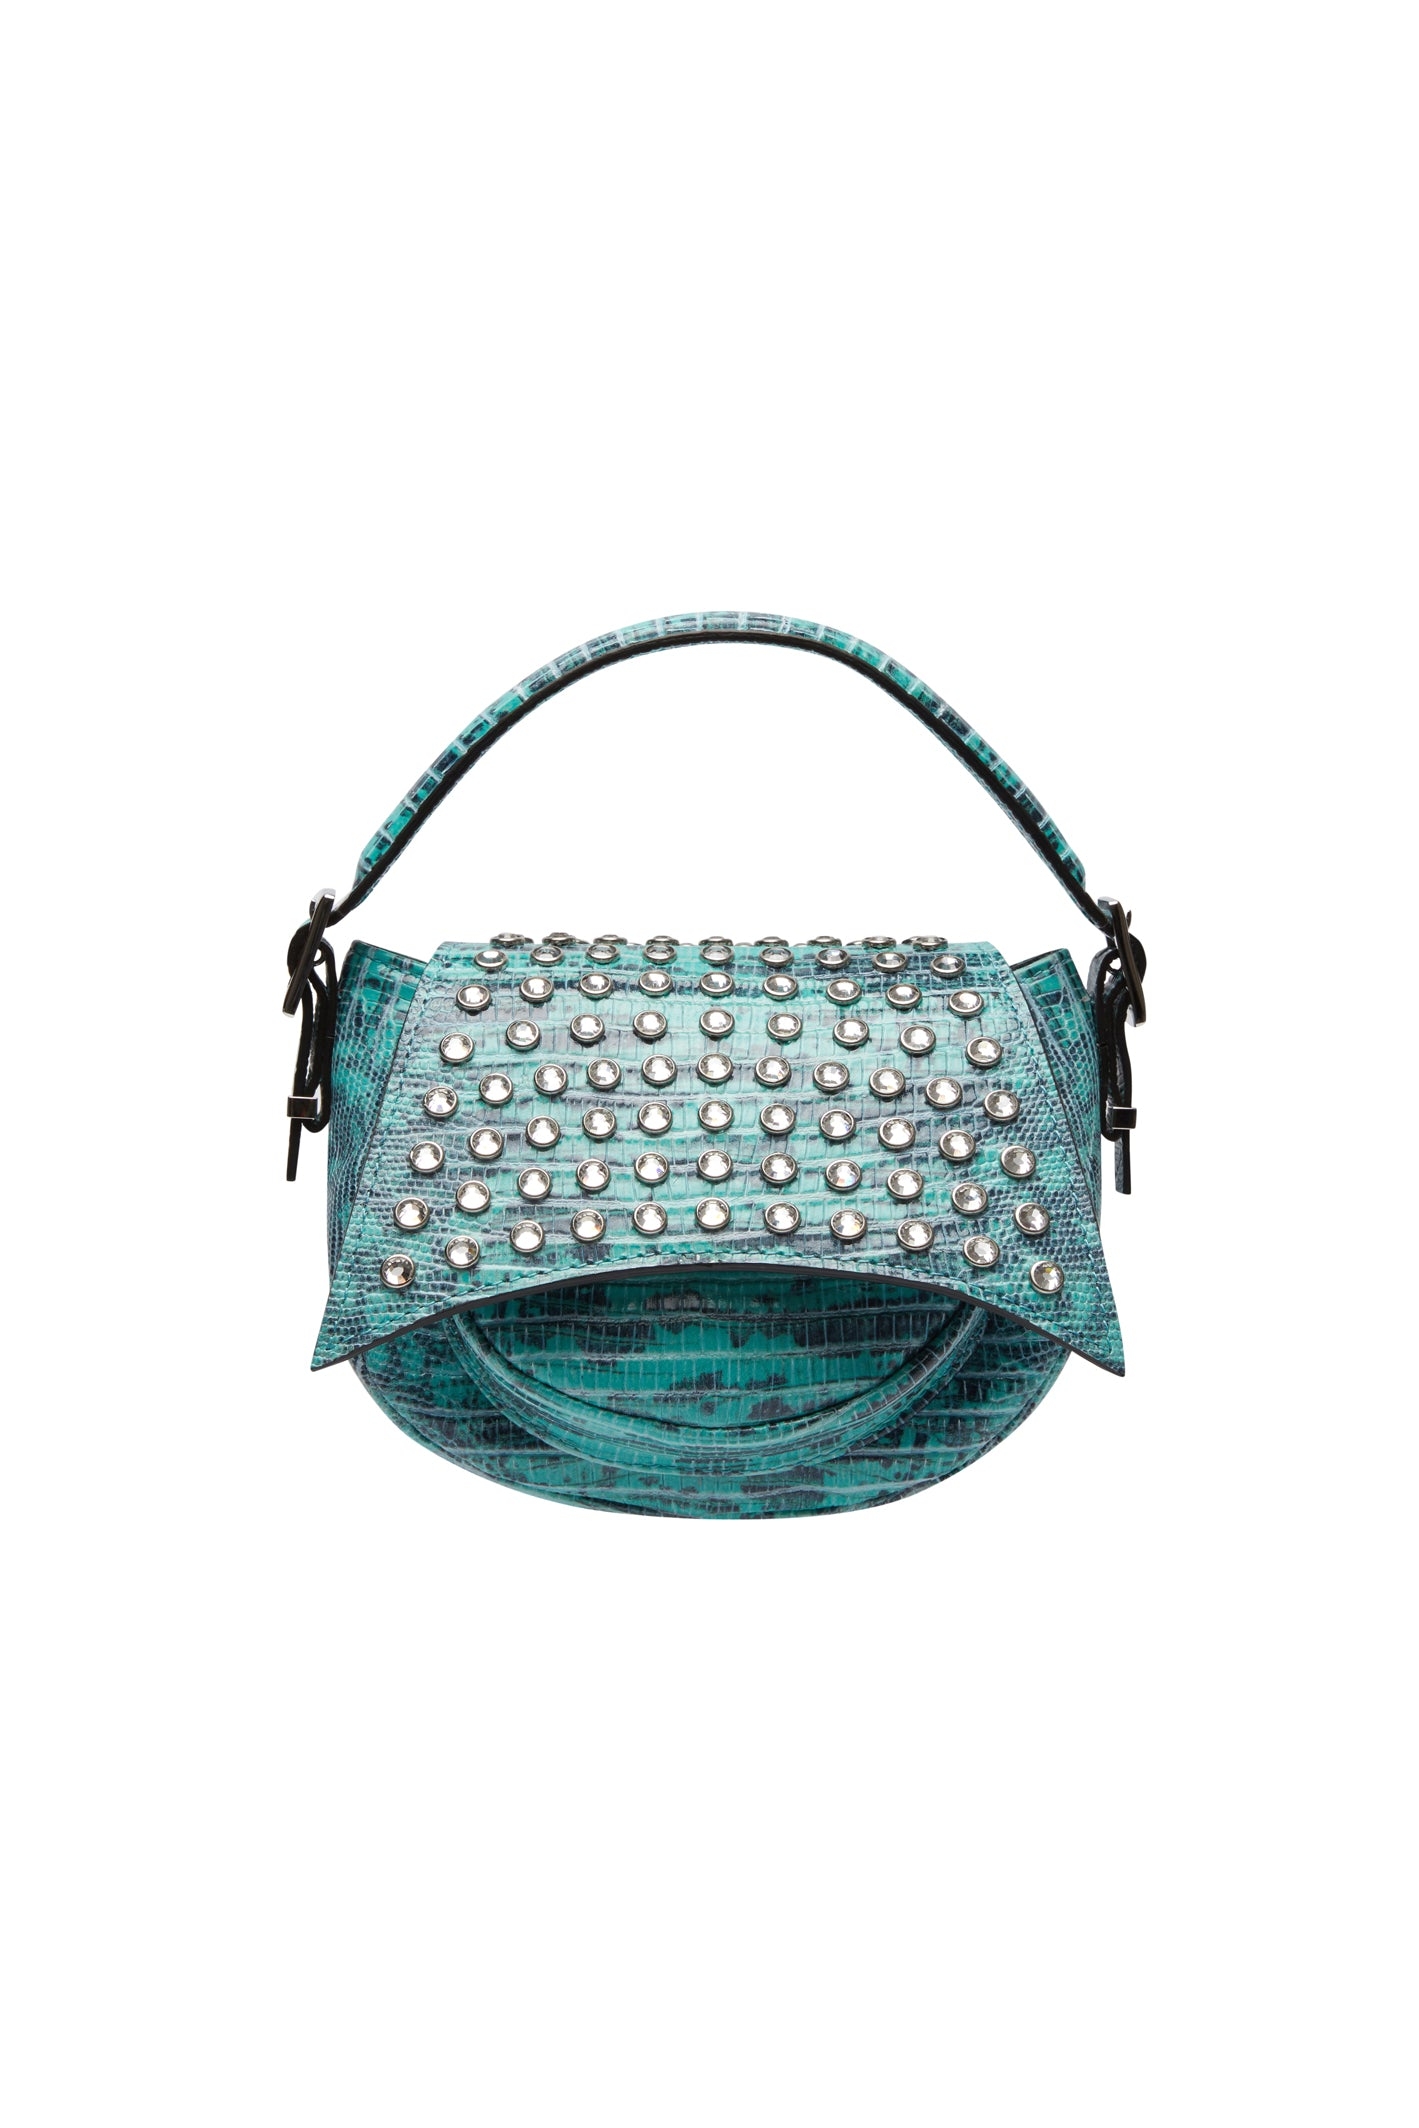 KIKS LEATHER BAG IN TURQUOISE WITH CRYSTALS – 16Arlington